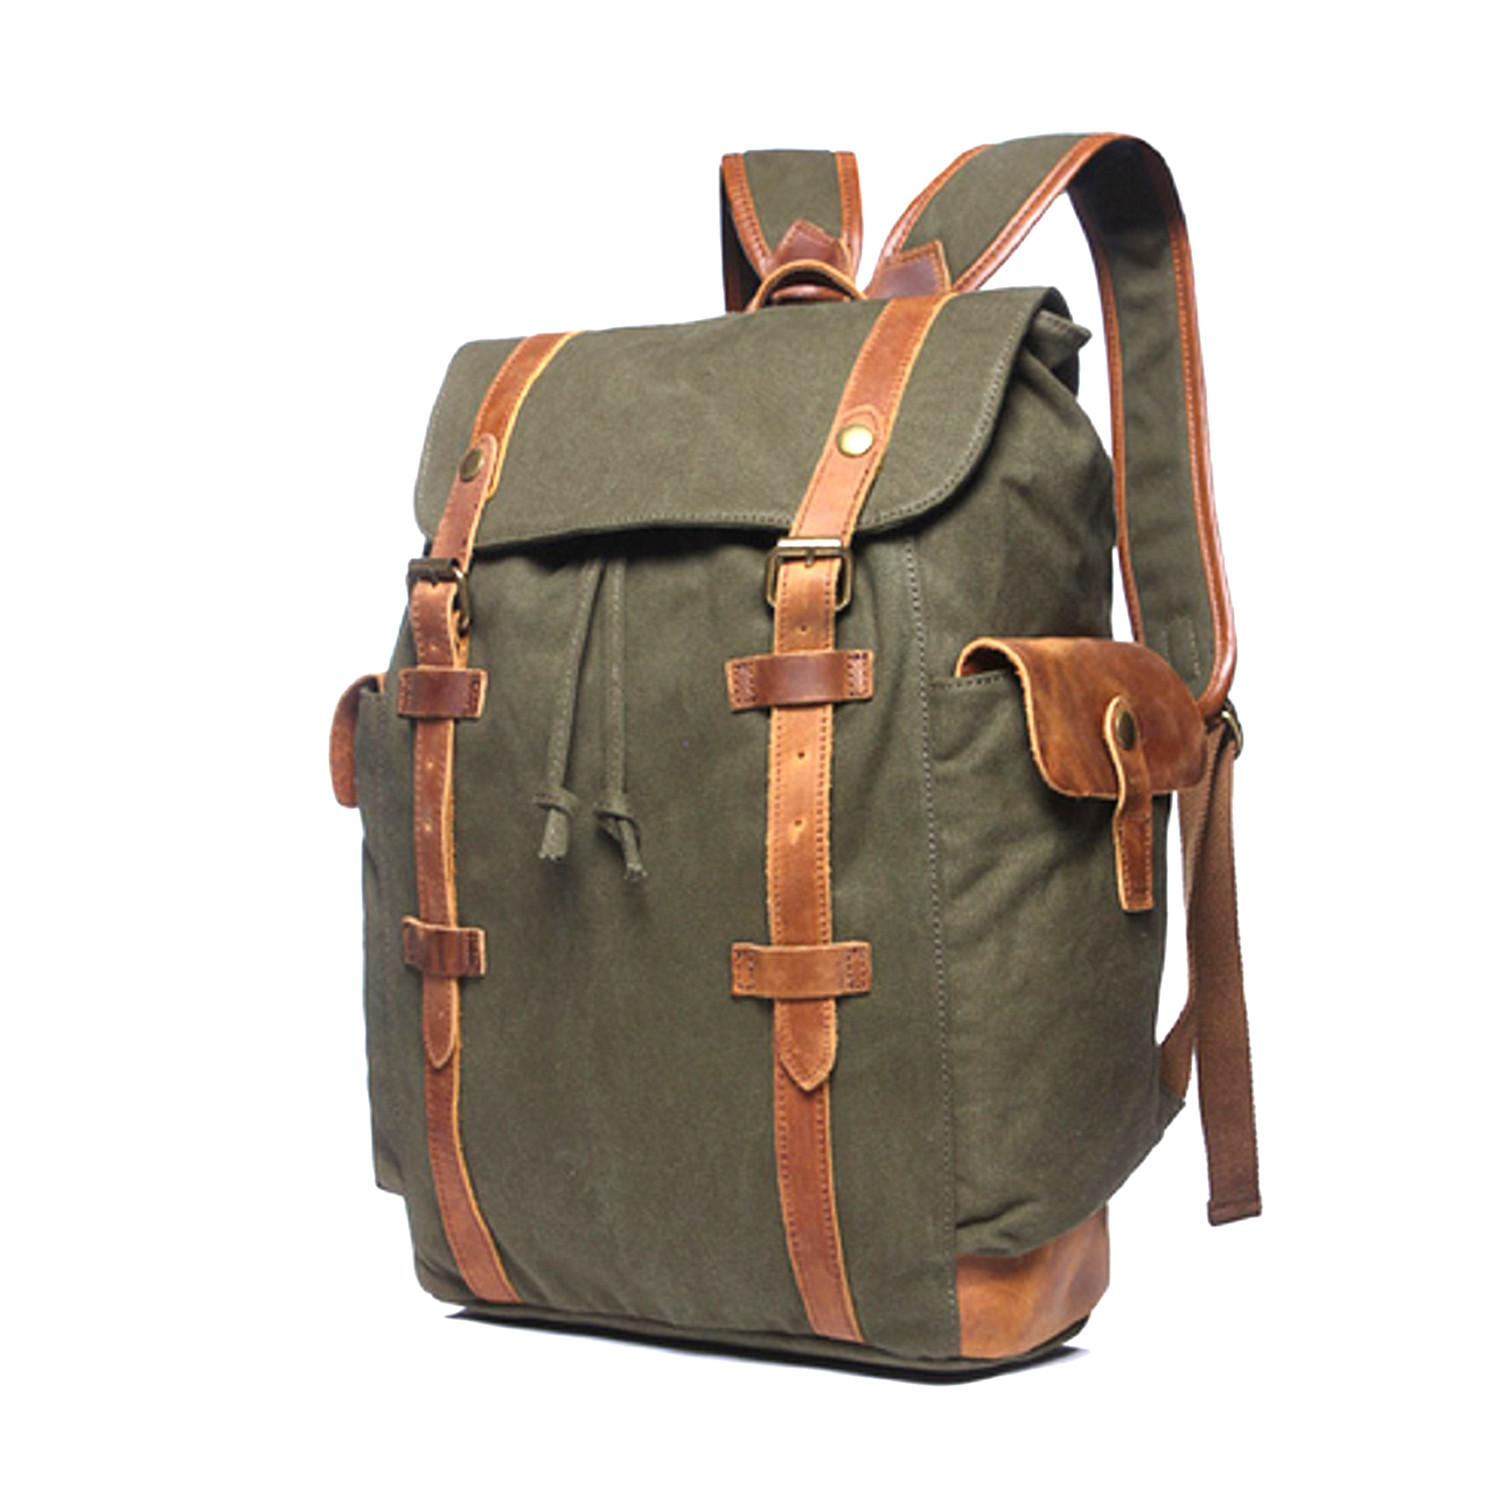 No. 746 Canvas Backpack (Navy) - OwnBag - Touch of Modern